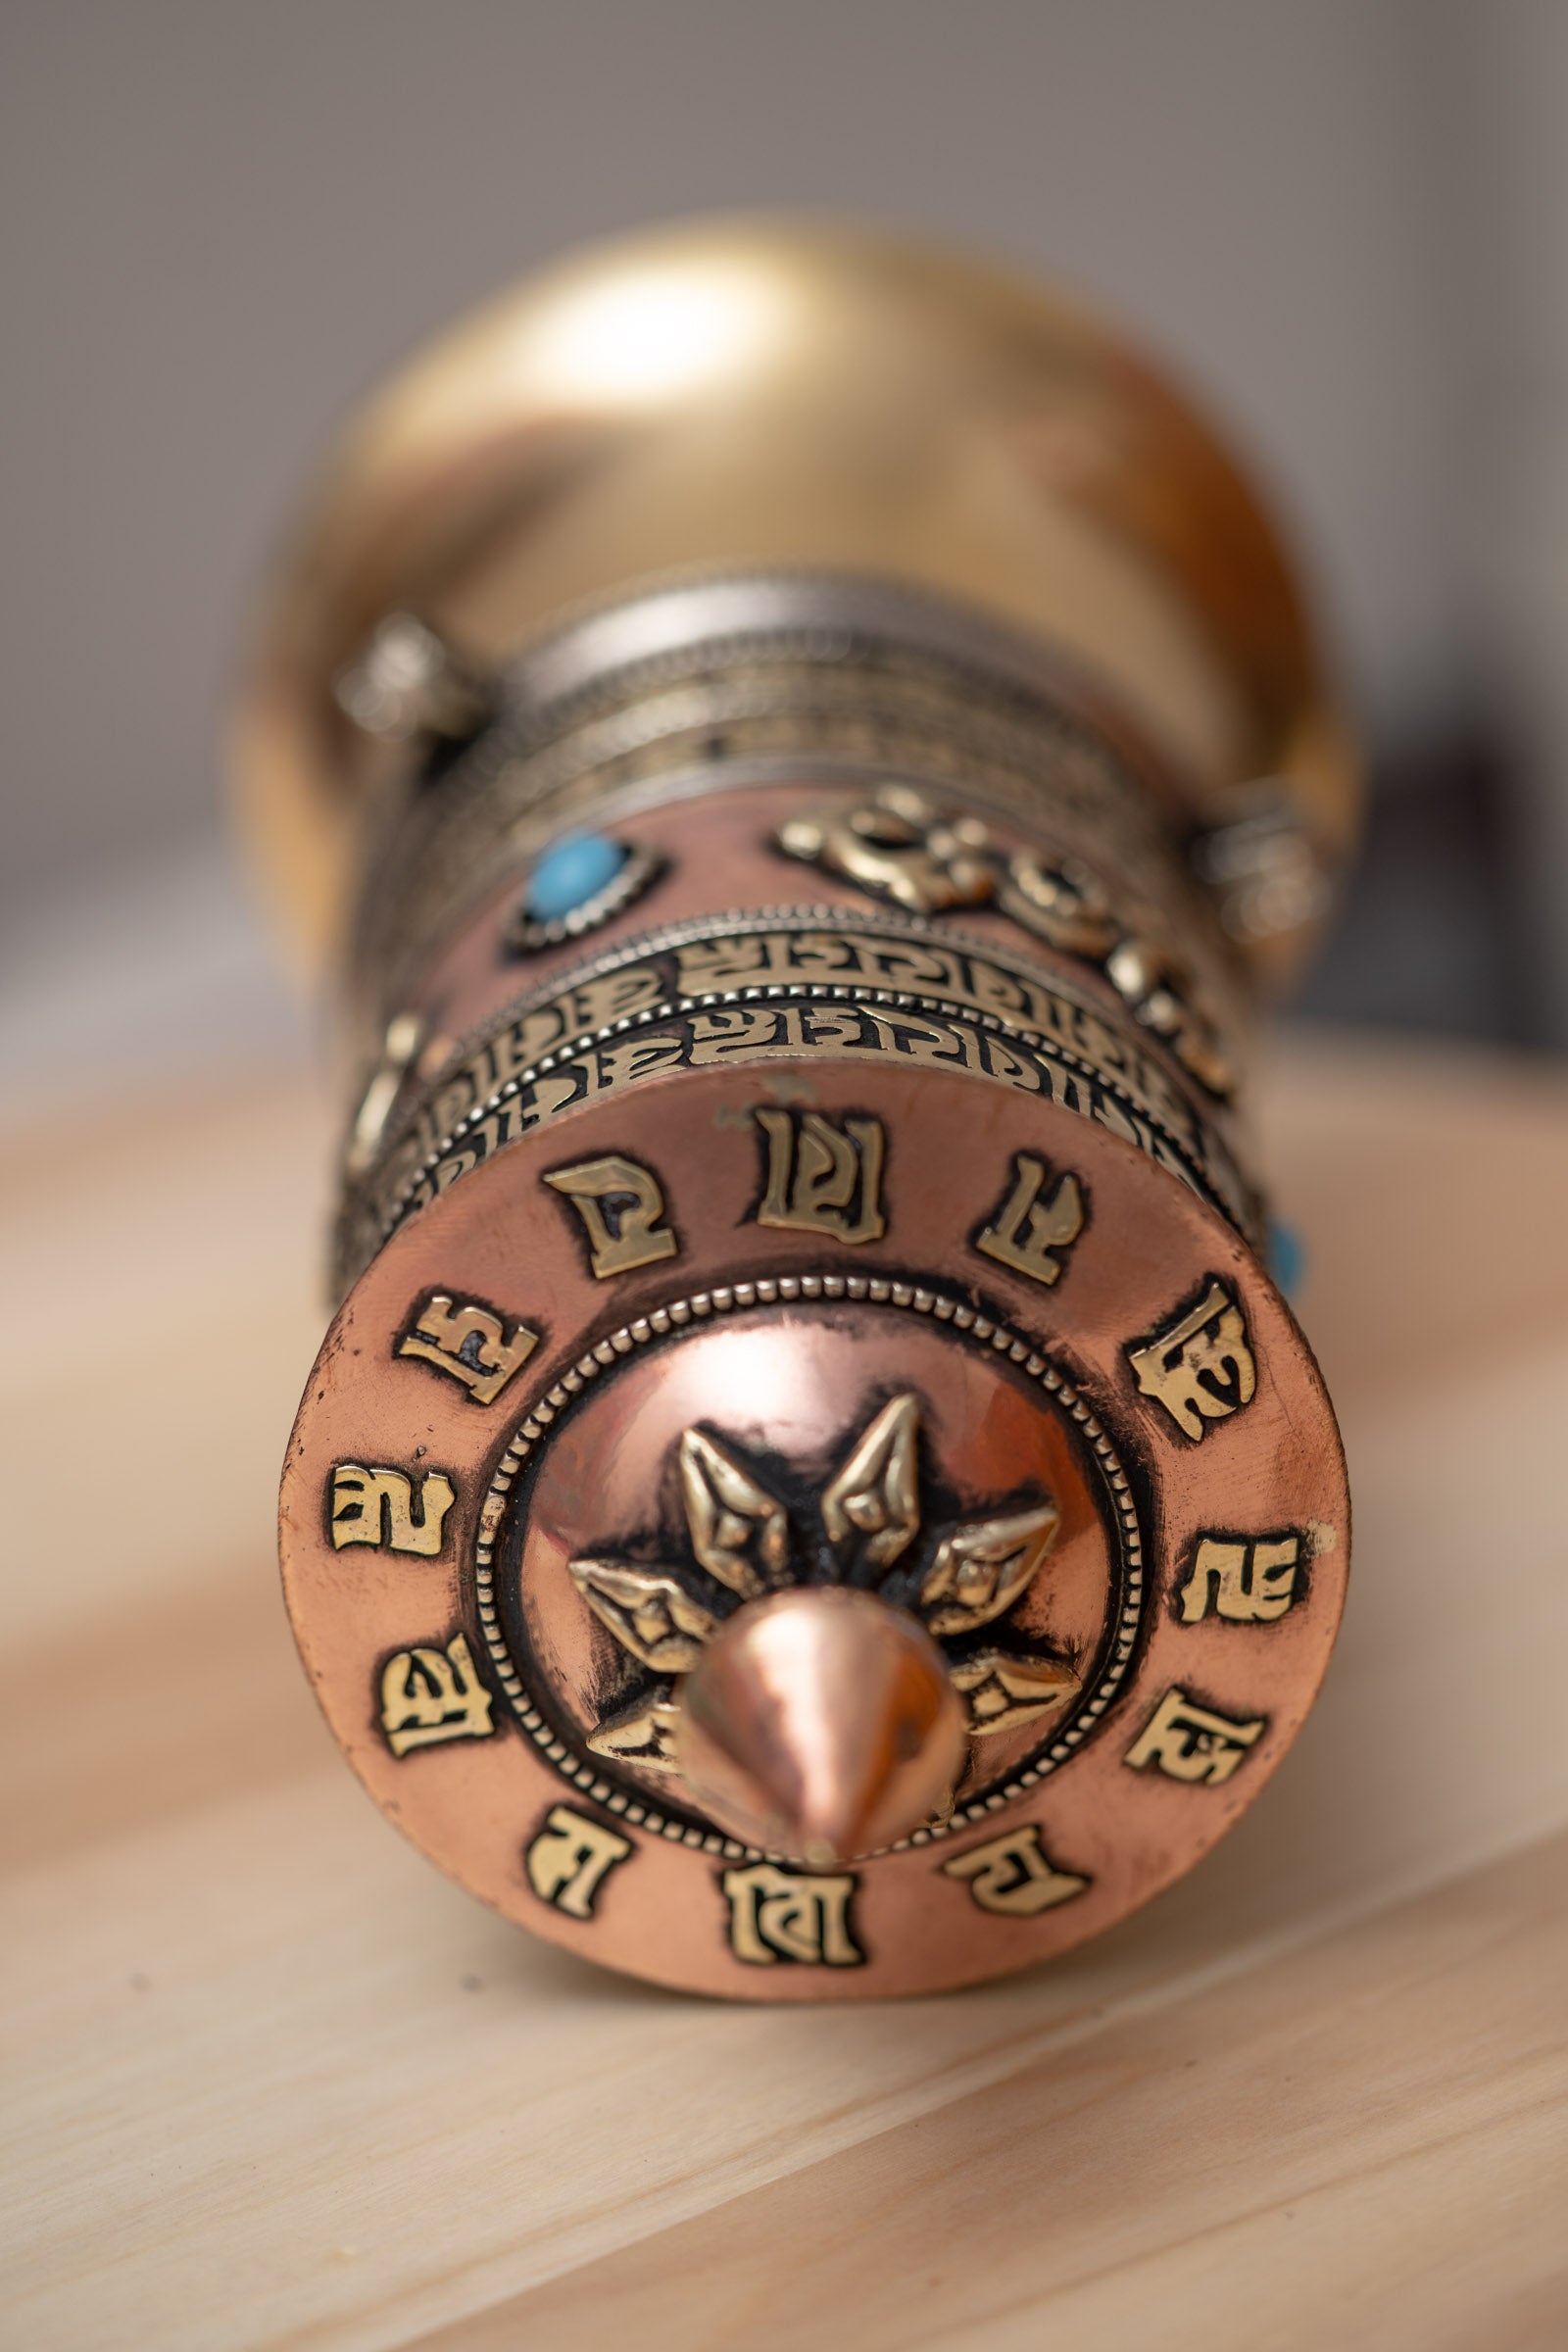 Bajra  Prayer Wheel spreads positive energy, compassion, and blessings to all sentient beings.